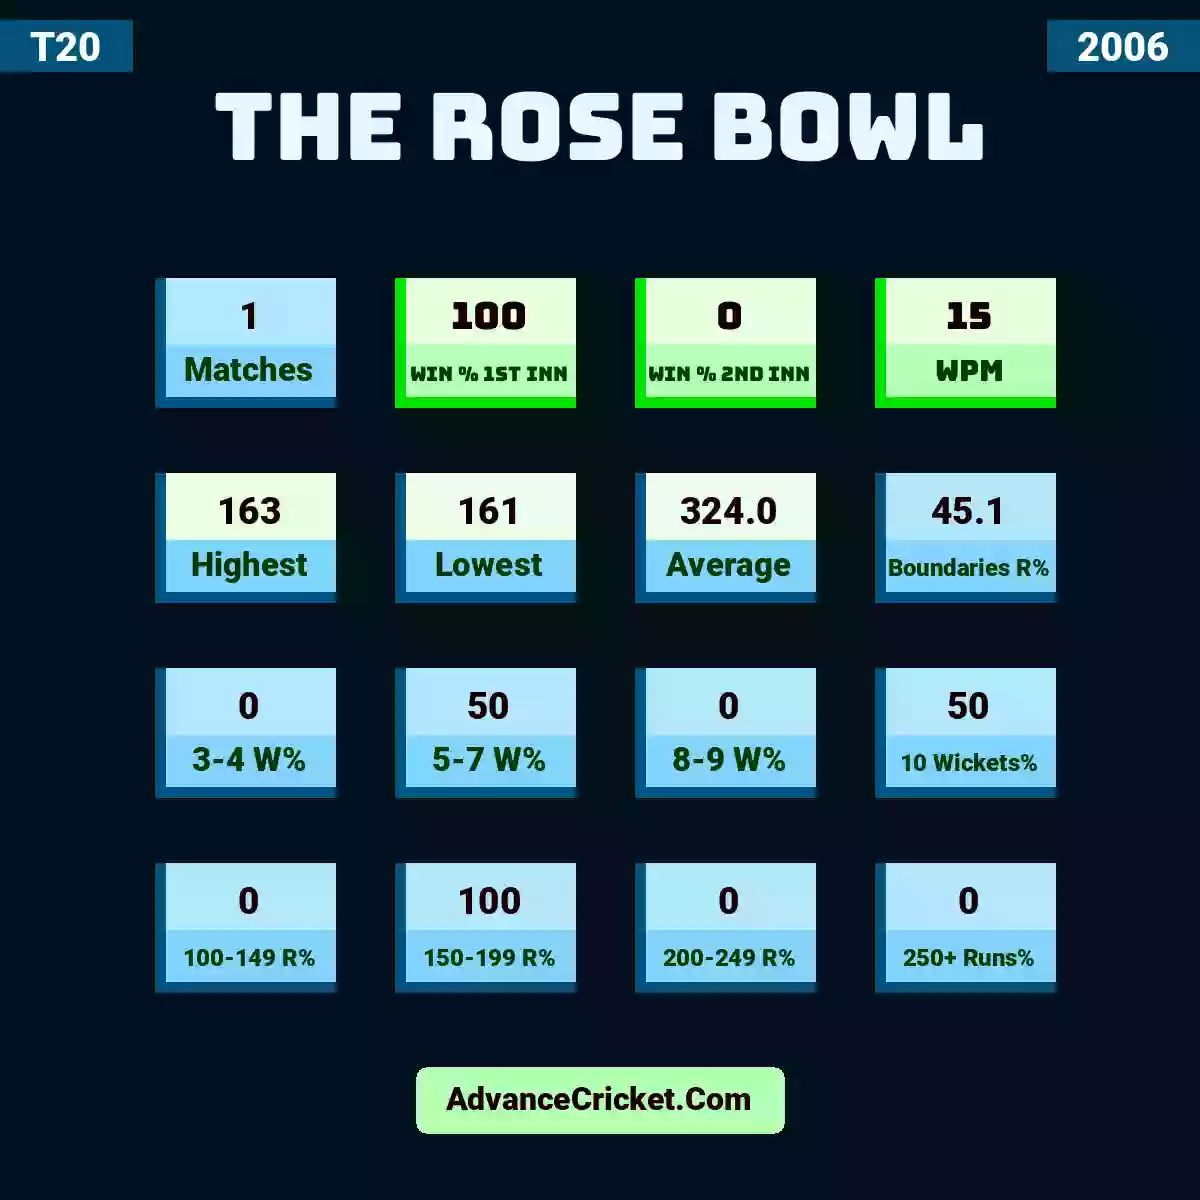 Image showing The Rose Bowl with Matches: 1, Win % 1st Inn: 100, Win % 2nd Inn: 0, WPM: 15, Highest: 163, Lowest: 161, Average: 324.0, Boundaries R%: 45.1, 3-4 W%: 0, 5-7 W%: 50, 8-9 W%: 0, 10 Wickets%: 50, 100-149 R%: 0, 150-199 R%: 100, 200-249 R%: 0, 250+ Runs%: 0.